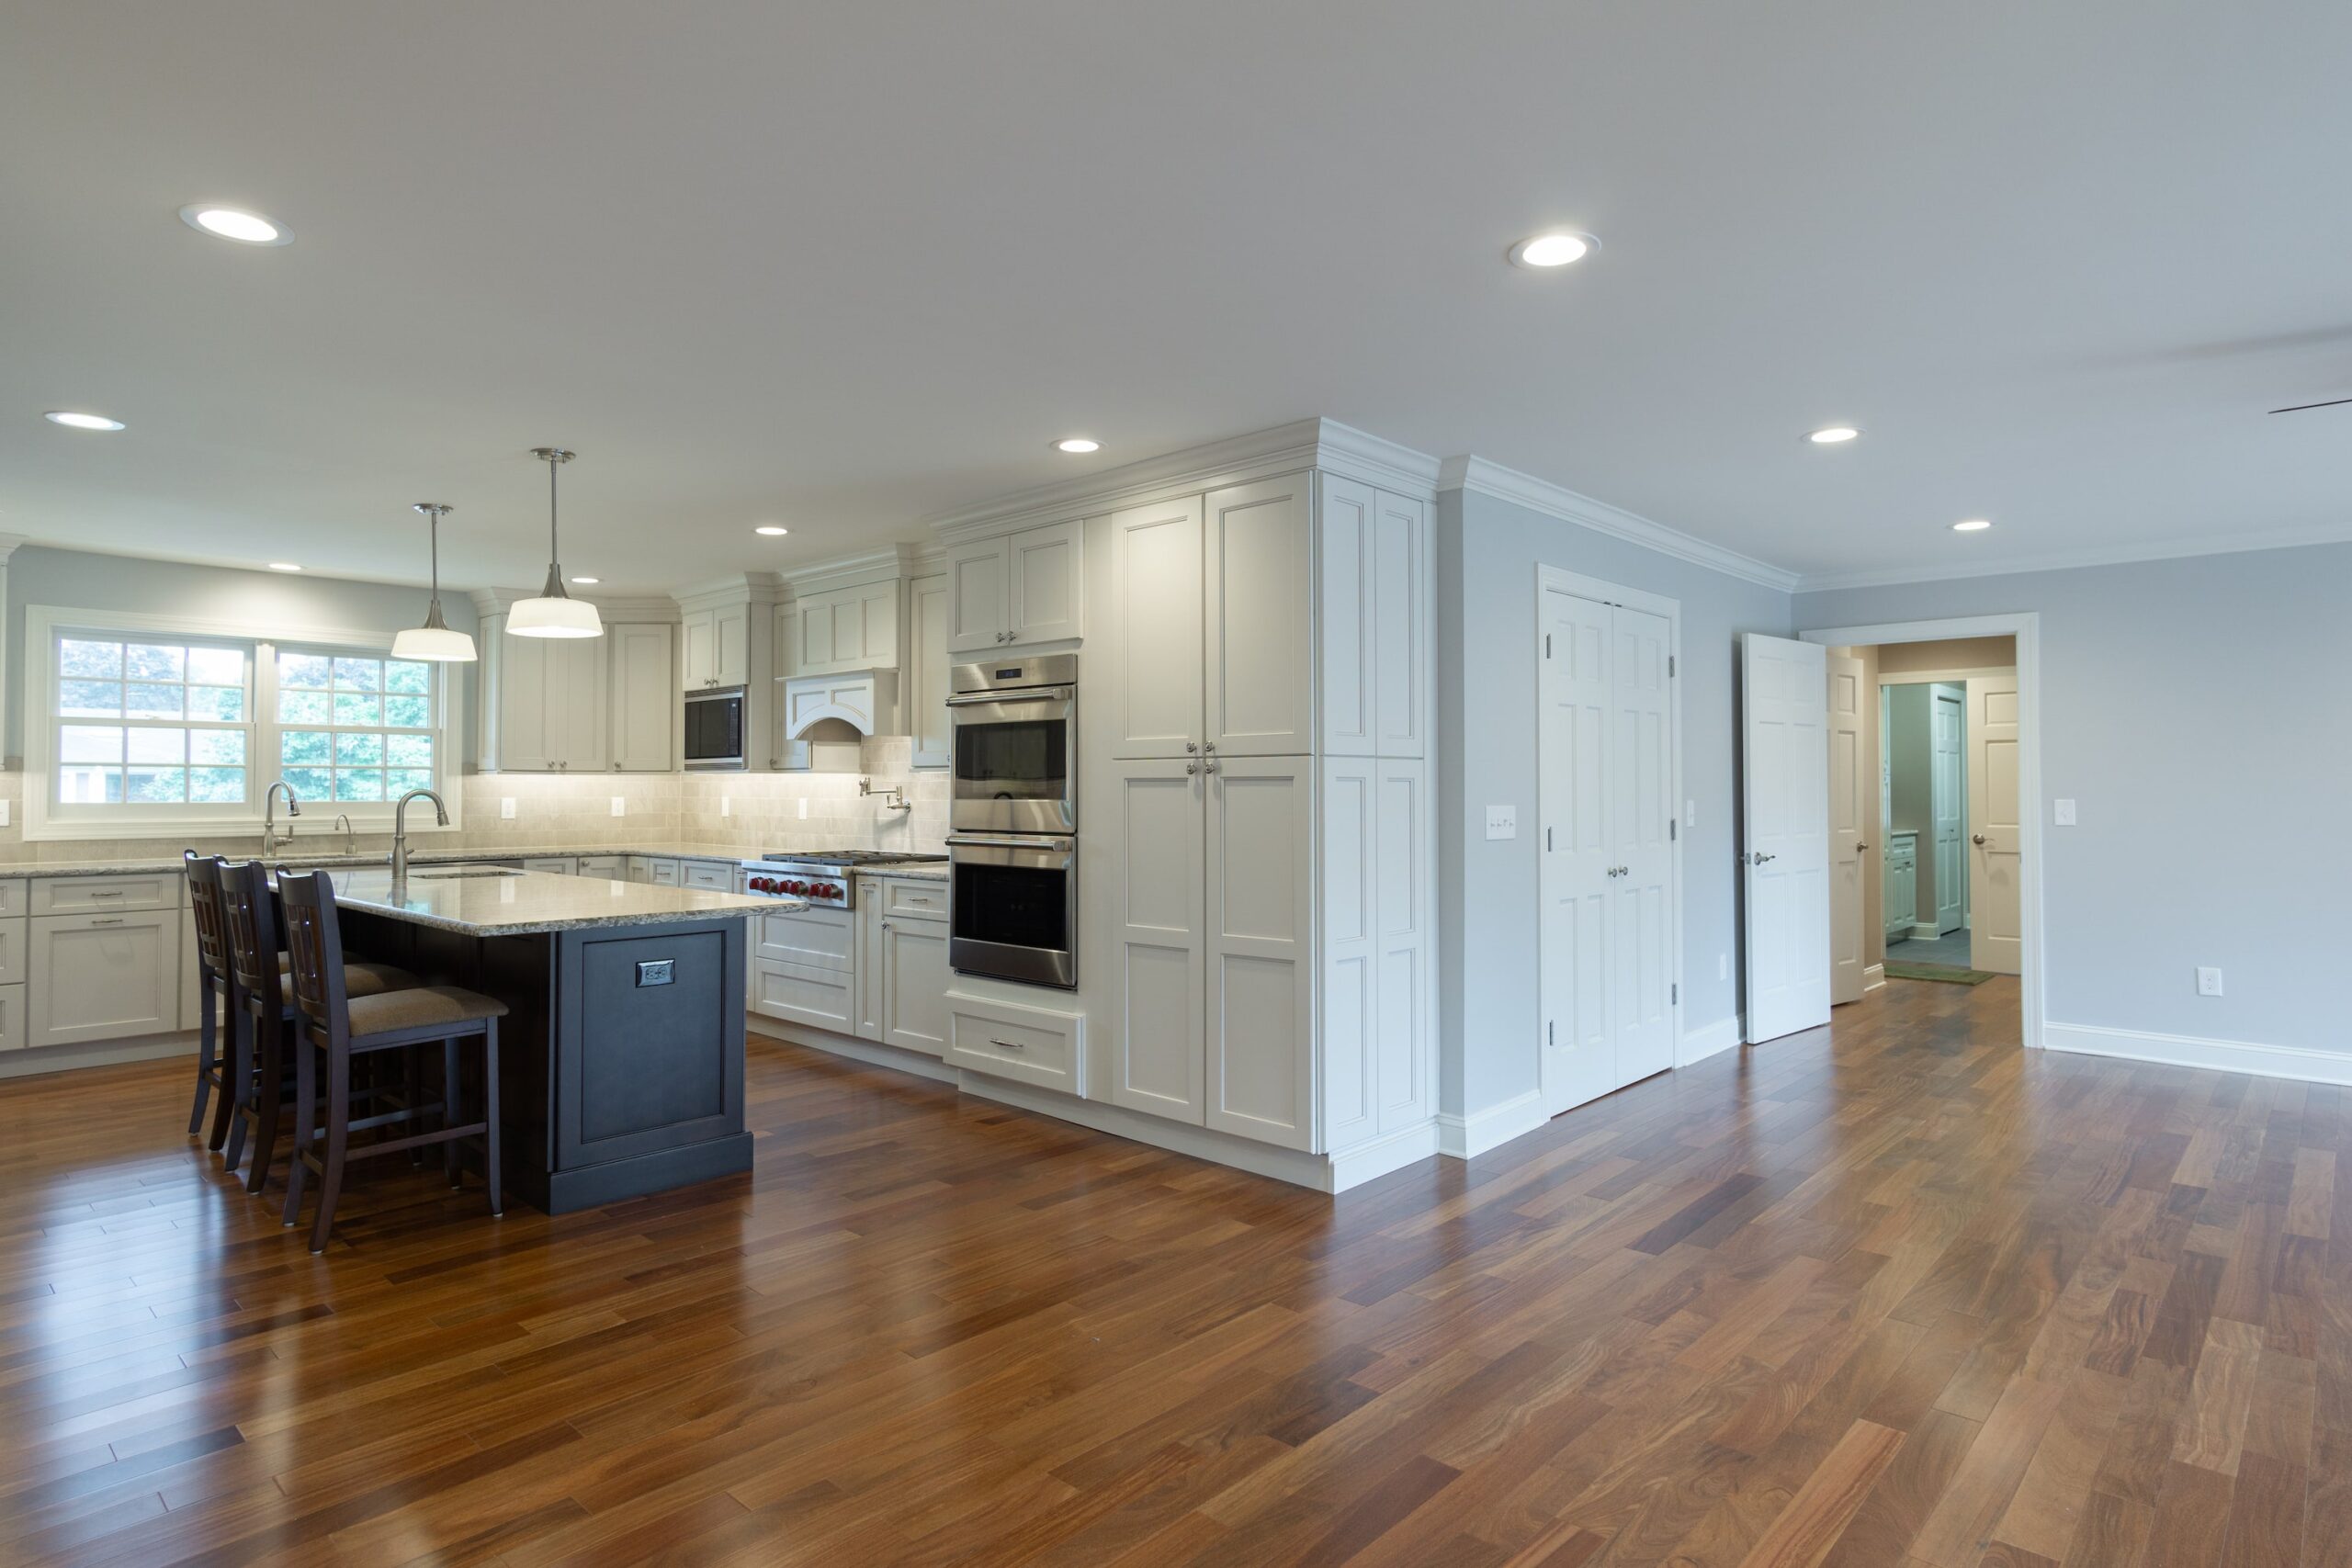 Kitchen with white cabinets and center island from amiano and son